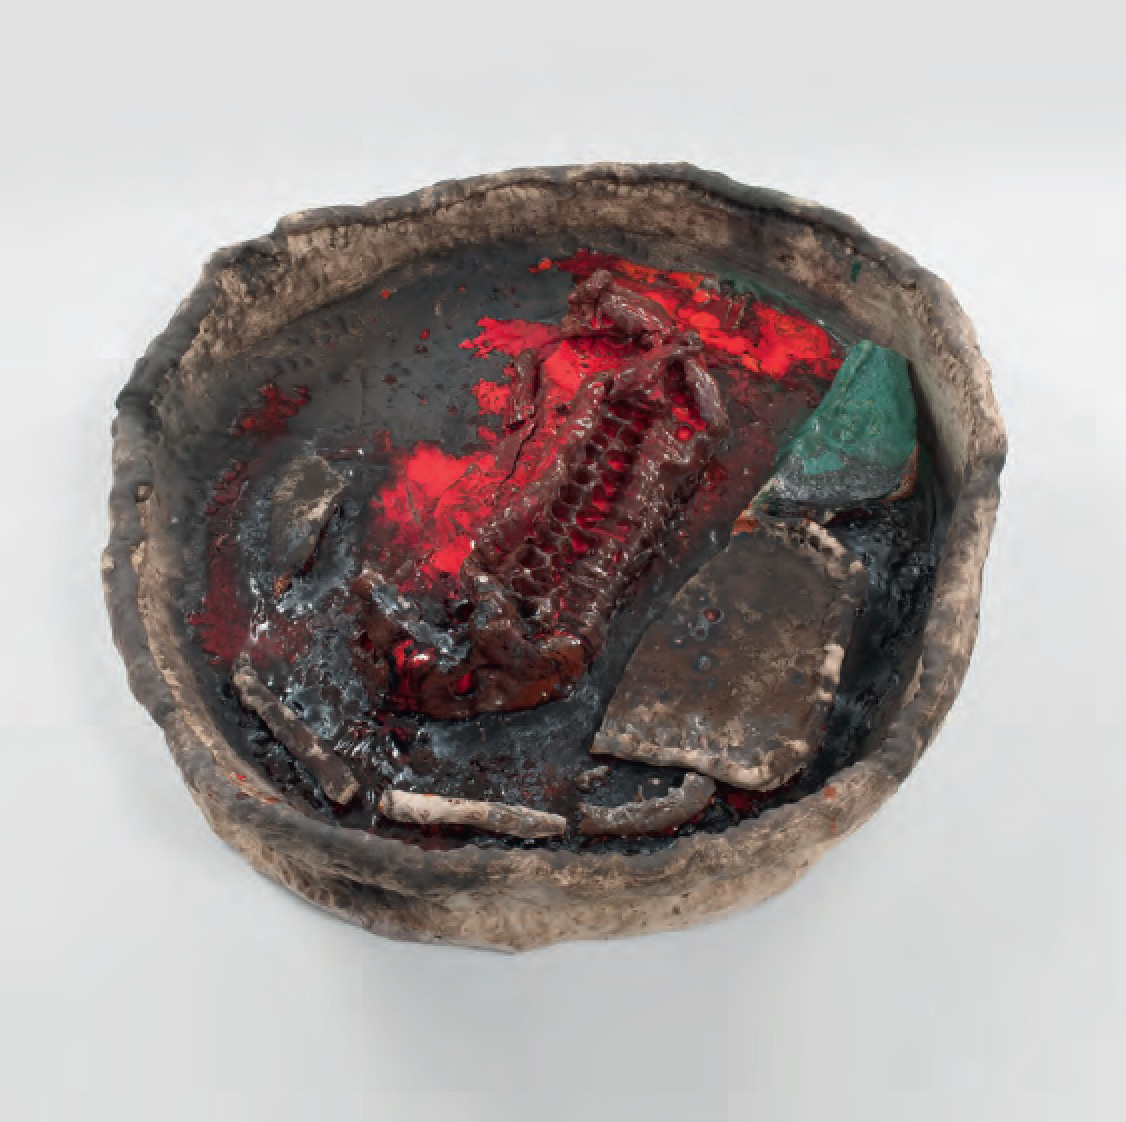 Basin Theology/Camp Routh, 2011 Ceramic - Sterling Ruby - Courtesy Sterling Ruby Studio. Photo: Robert Wedemeyer